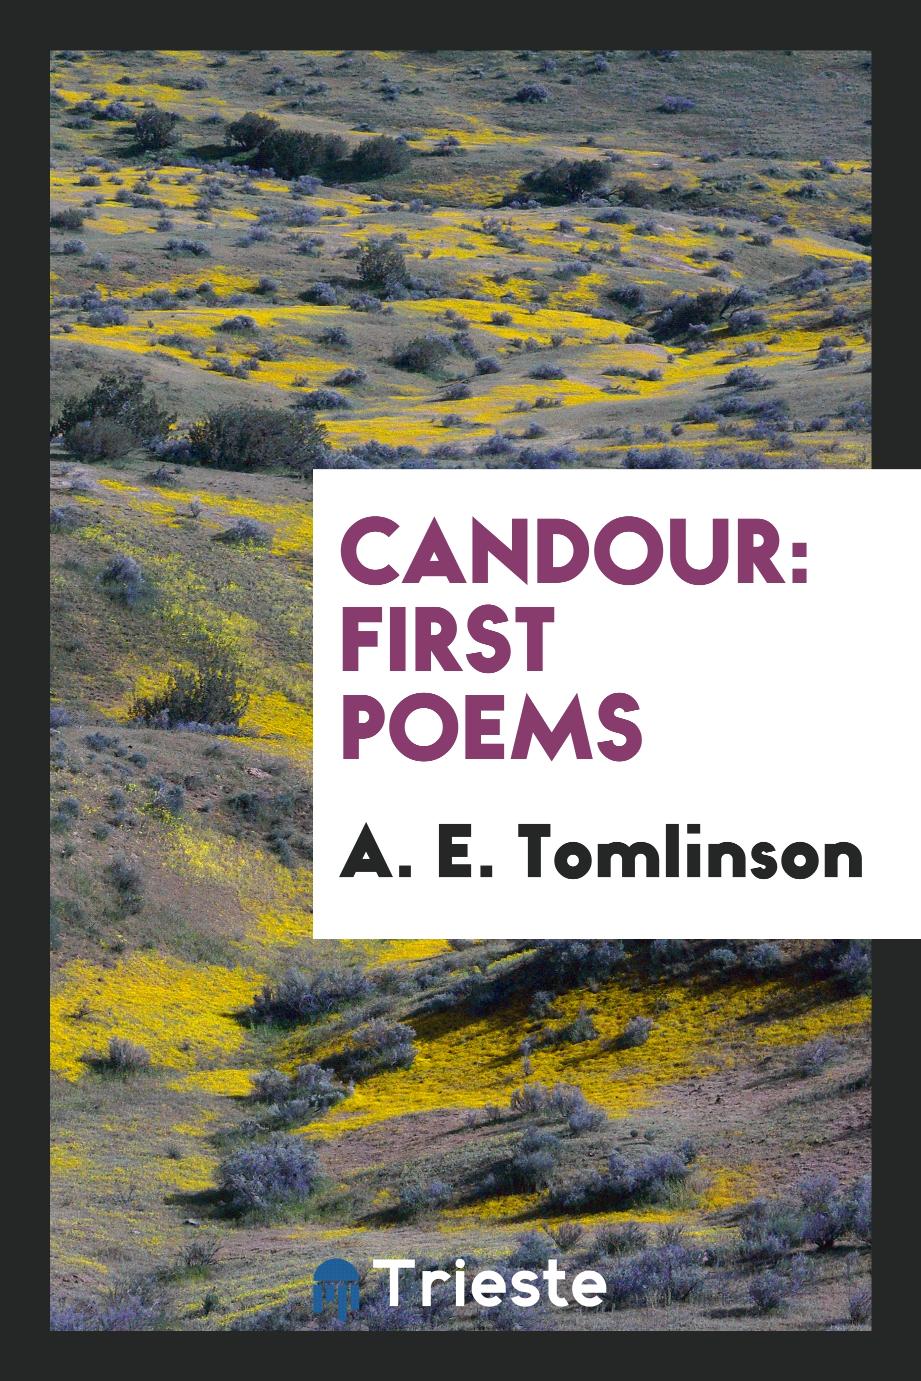 Candour: first poems